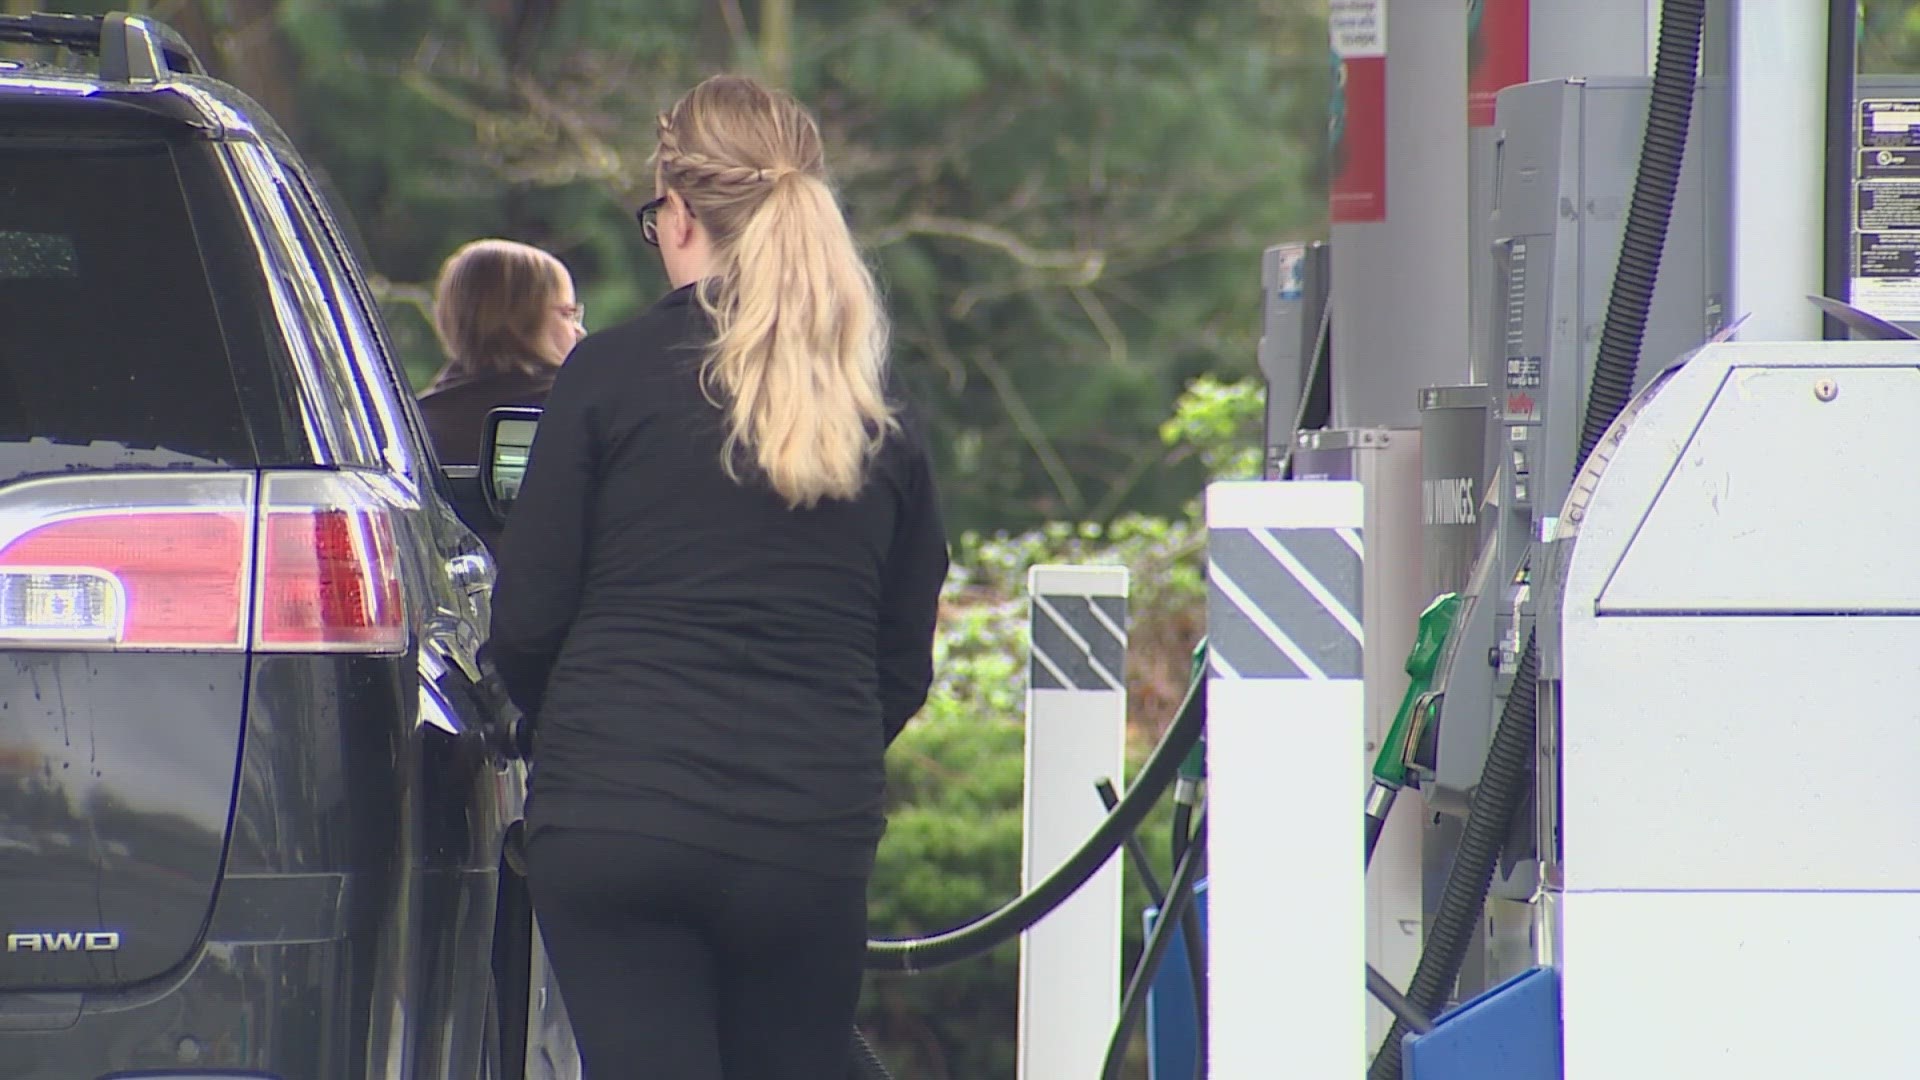 According to AAA, the current average for gas in Washington is about $4.27, which is about 84 cents more than the national average.